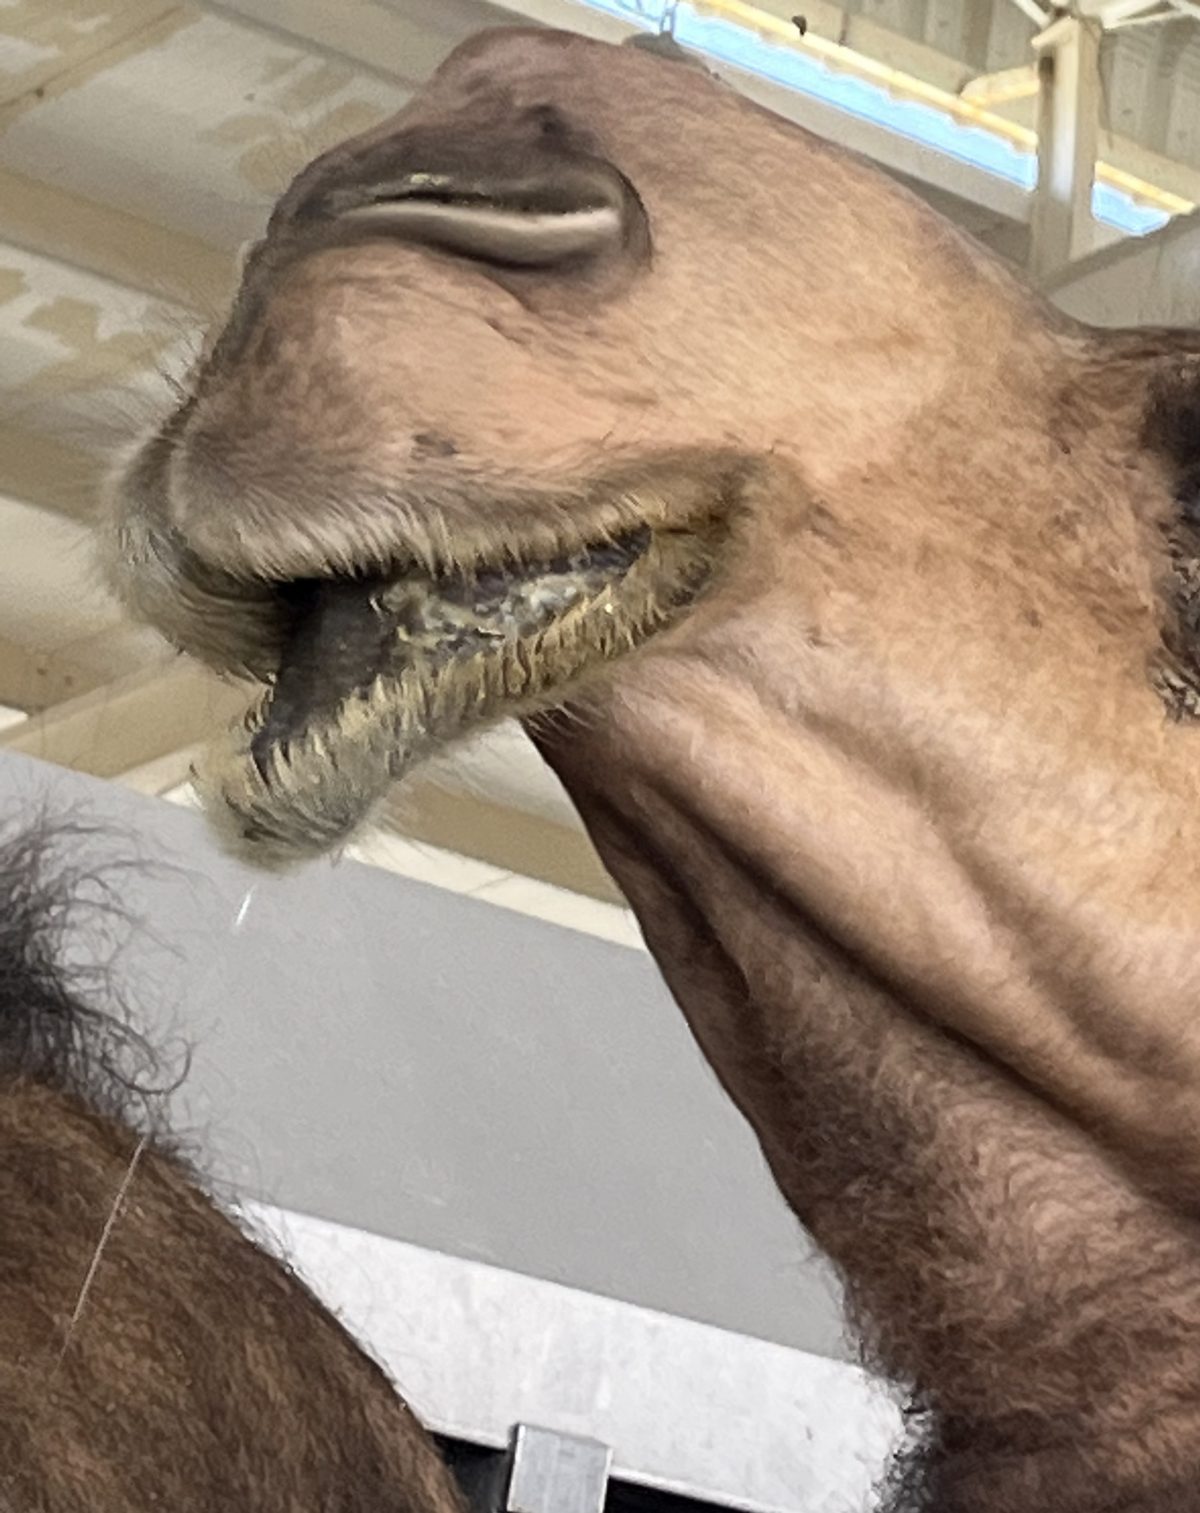 Camels have many types of faces and looking very different from eachother